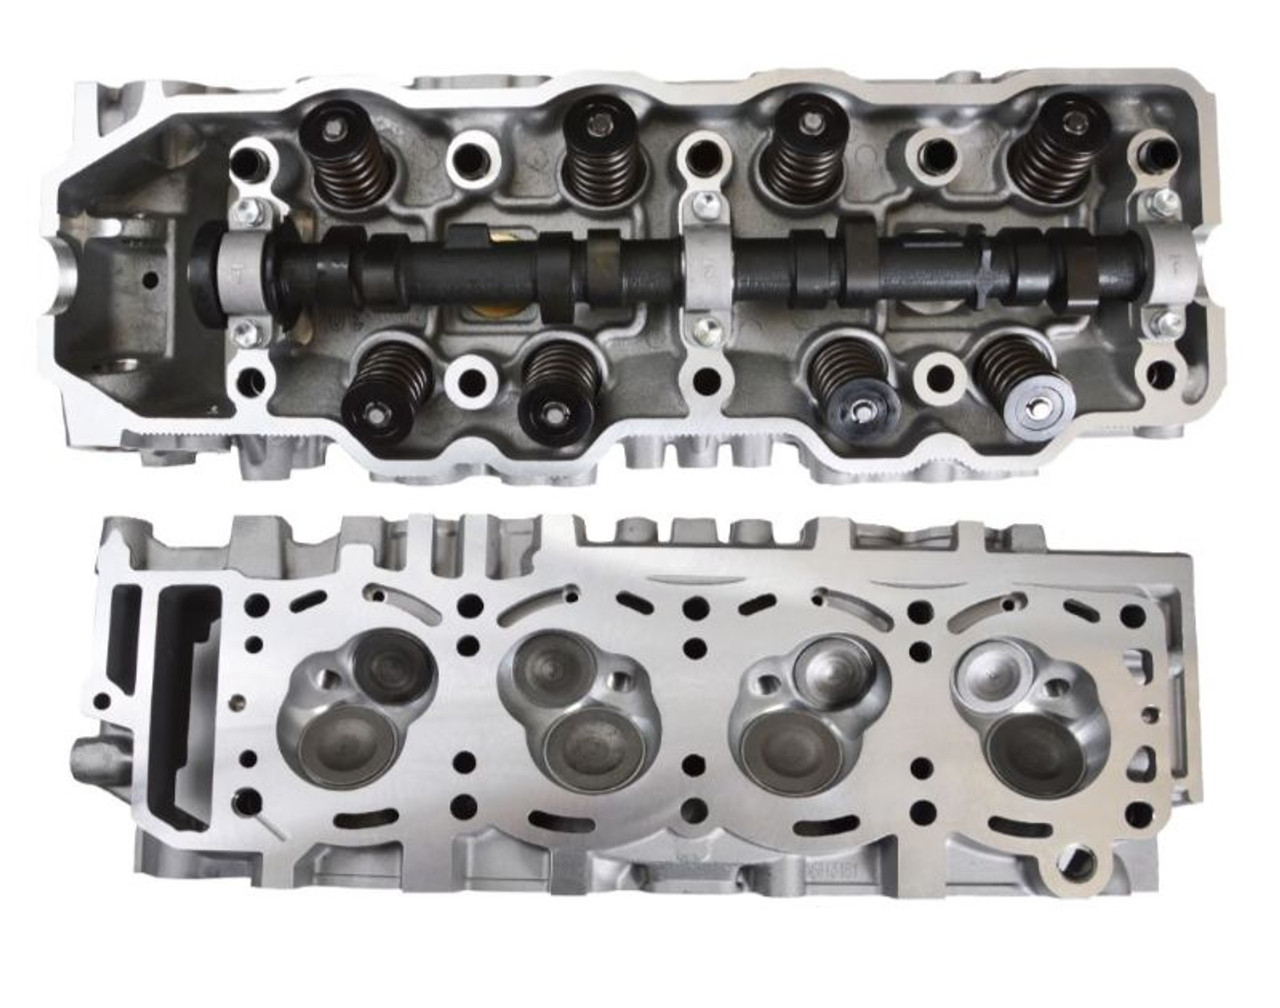 Cylinder Head Assembly - 1987 Toyota 4Runner 2.4L (CH1072N.A8)